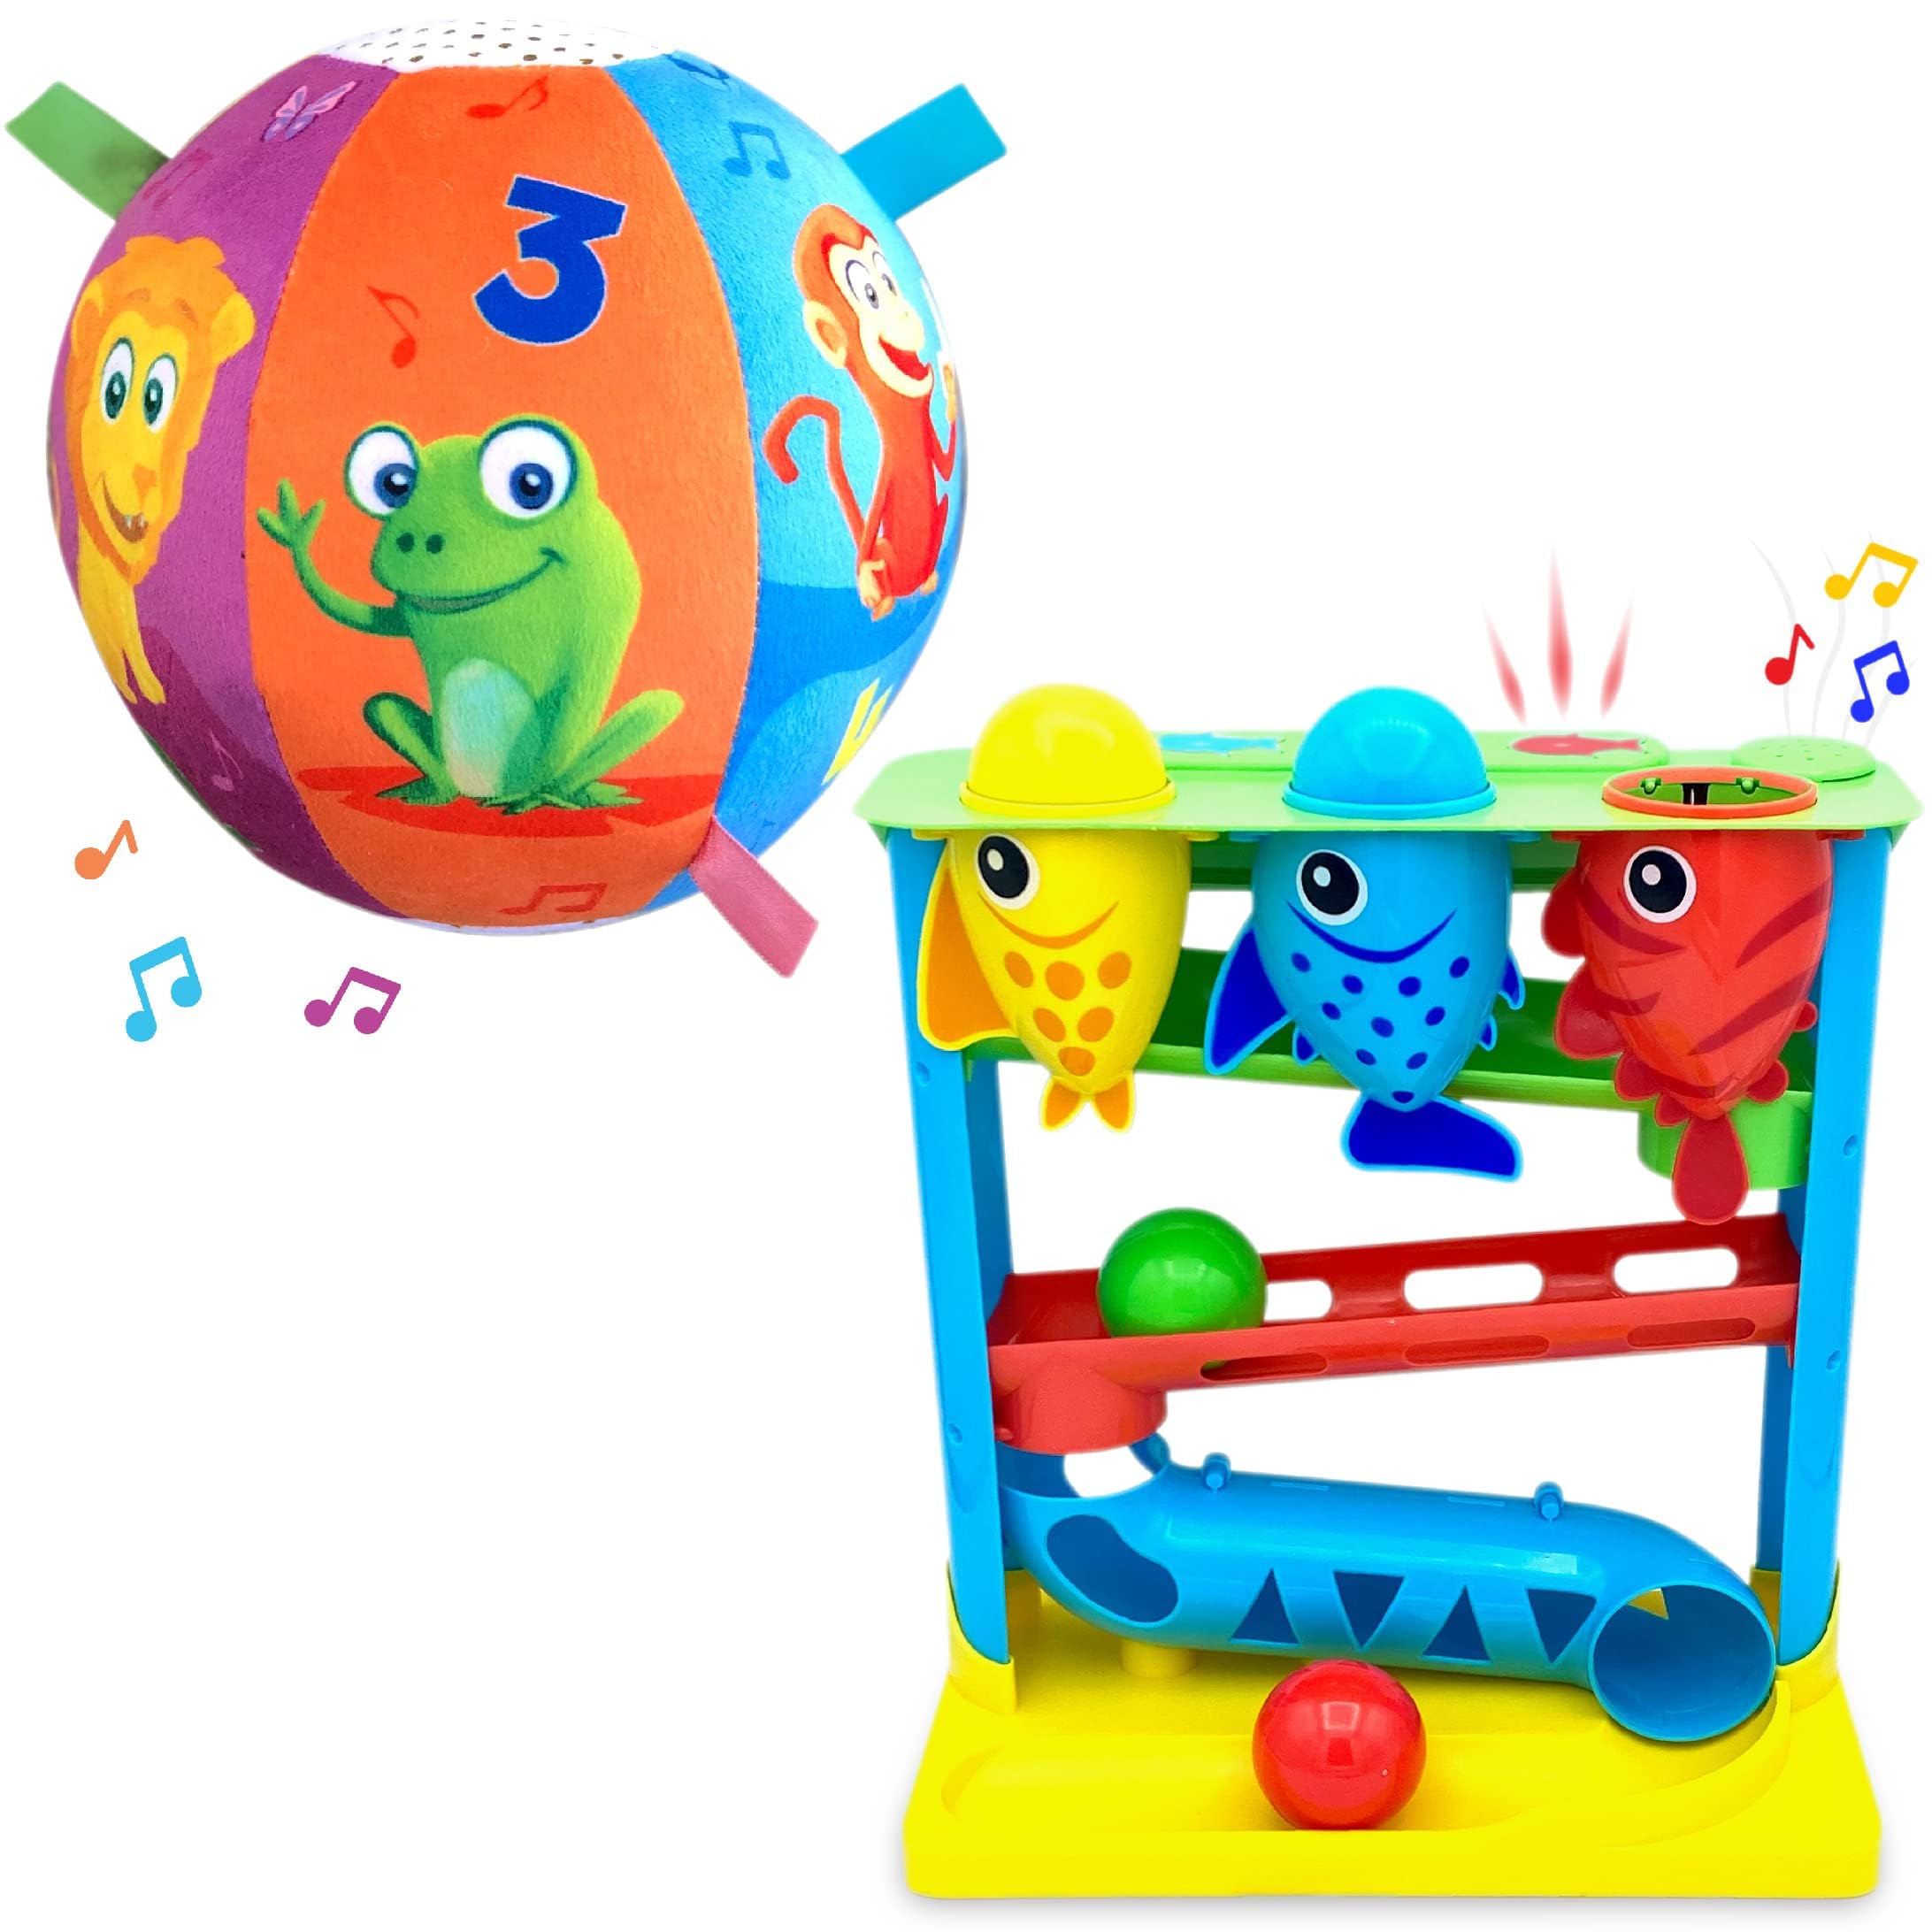 Move2Play Baby Crawl Ball and Fish Toy Bundle